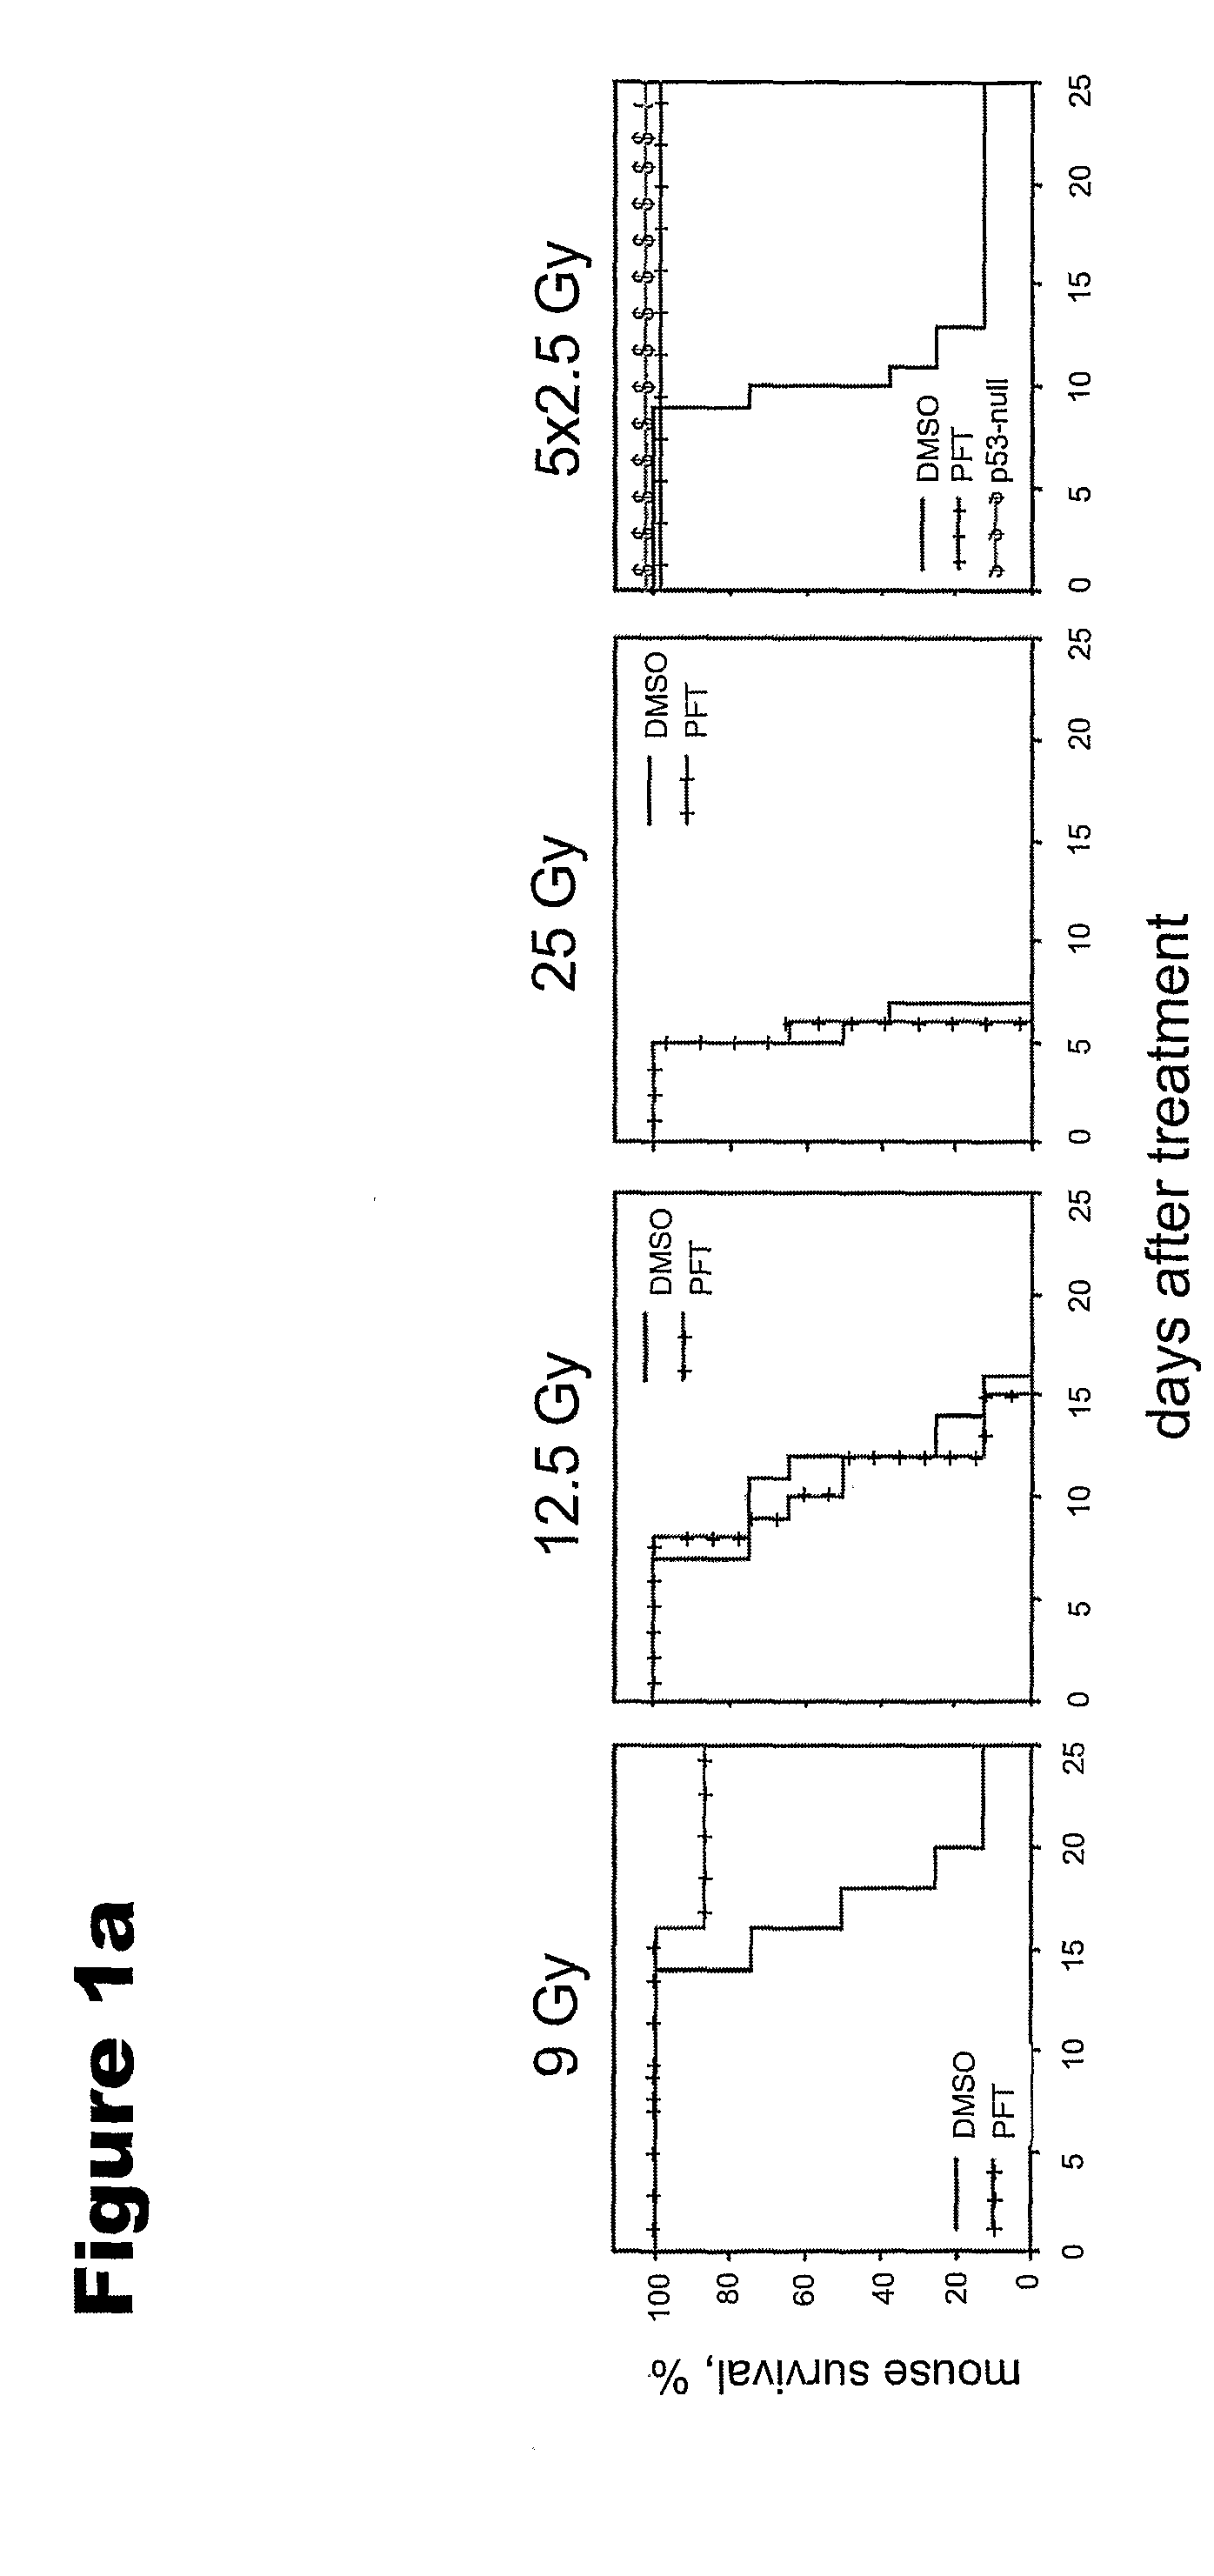 Methods of protecting against apoptosis using lipopeptides